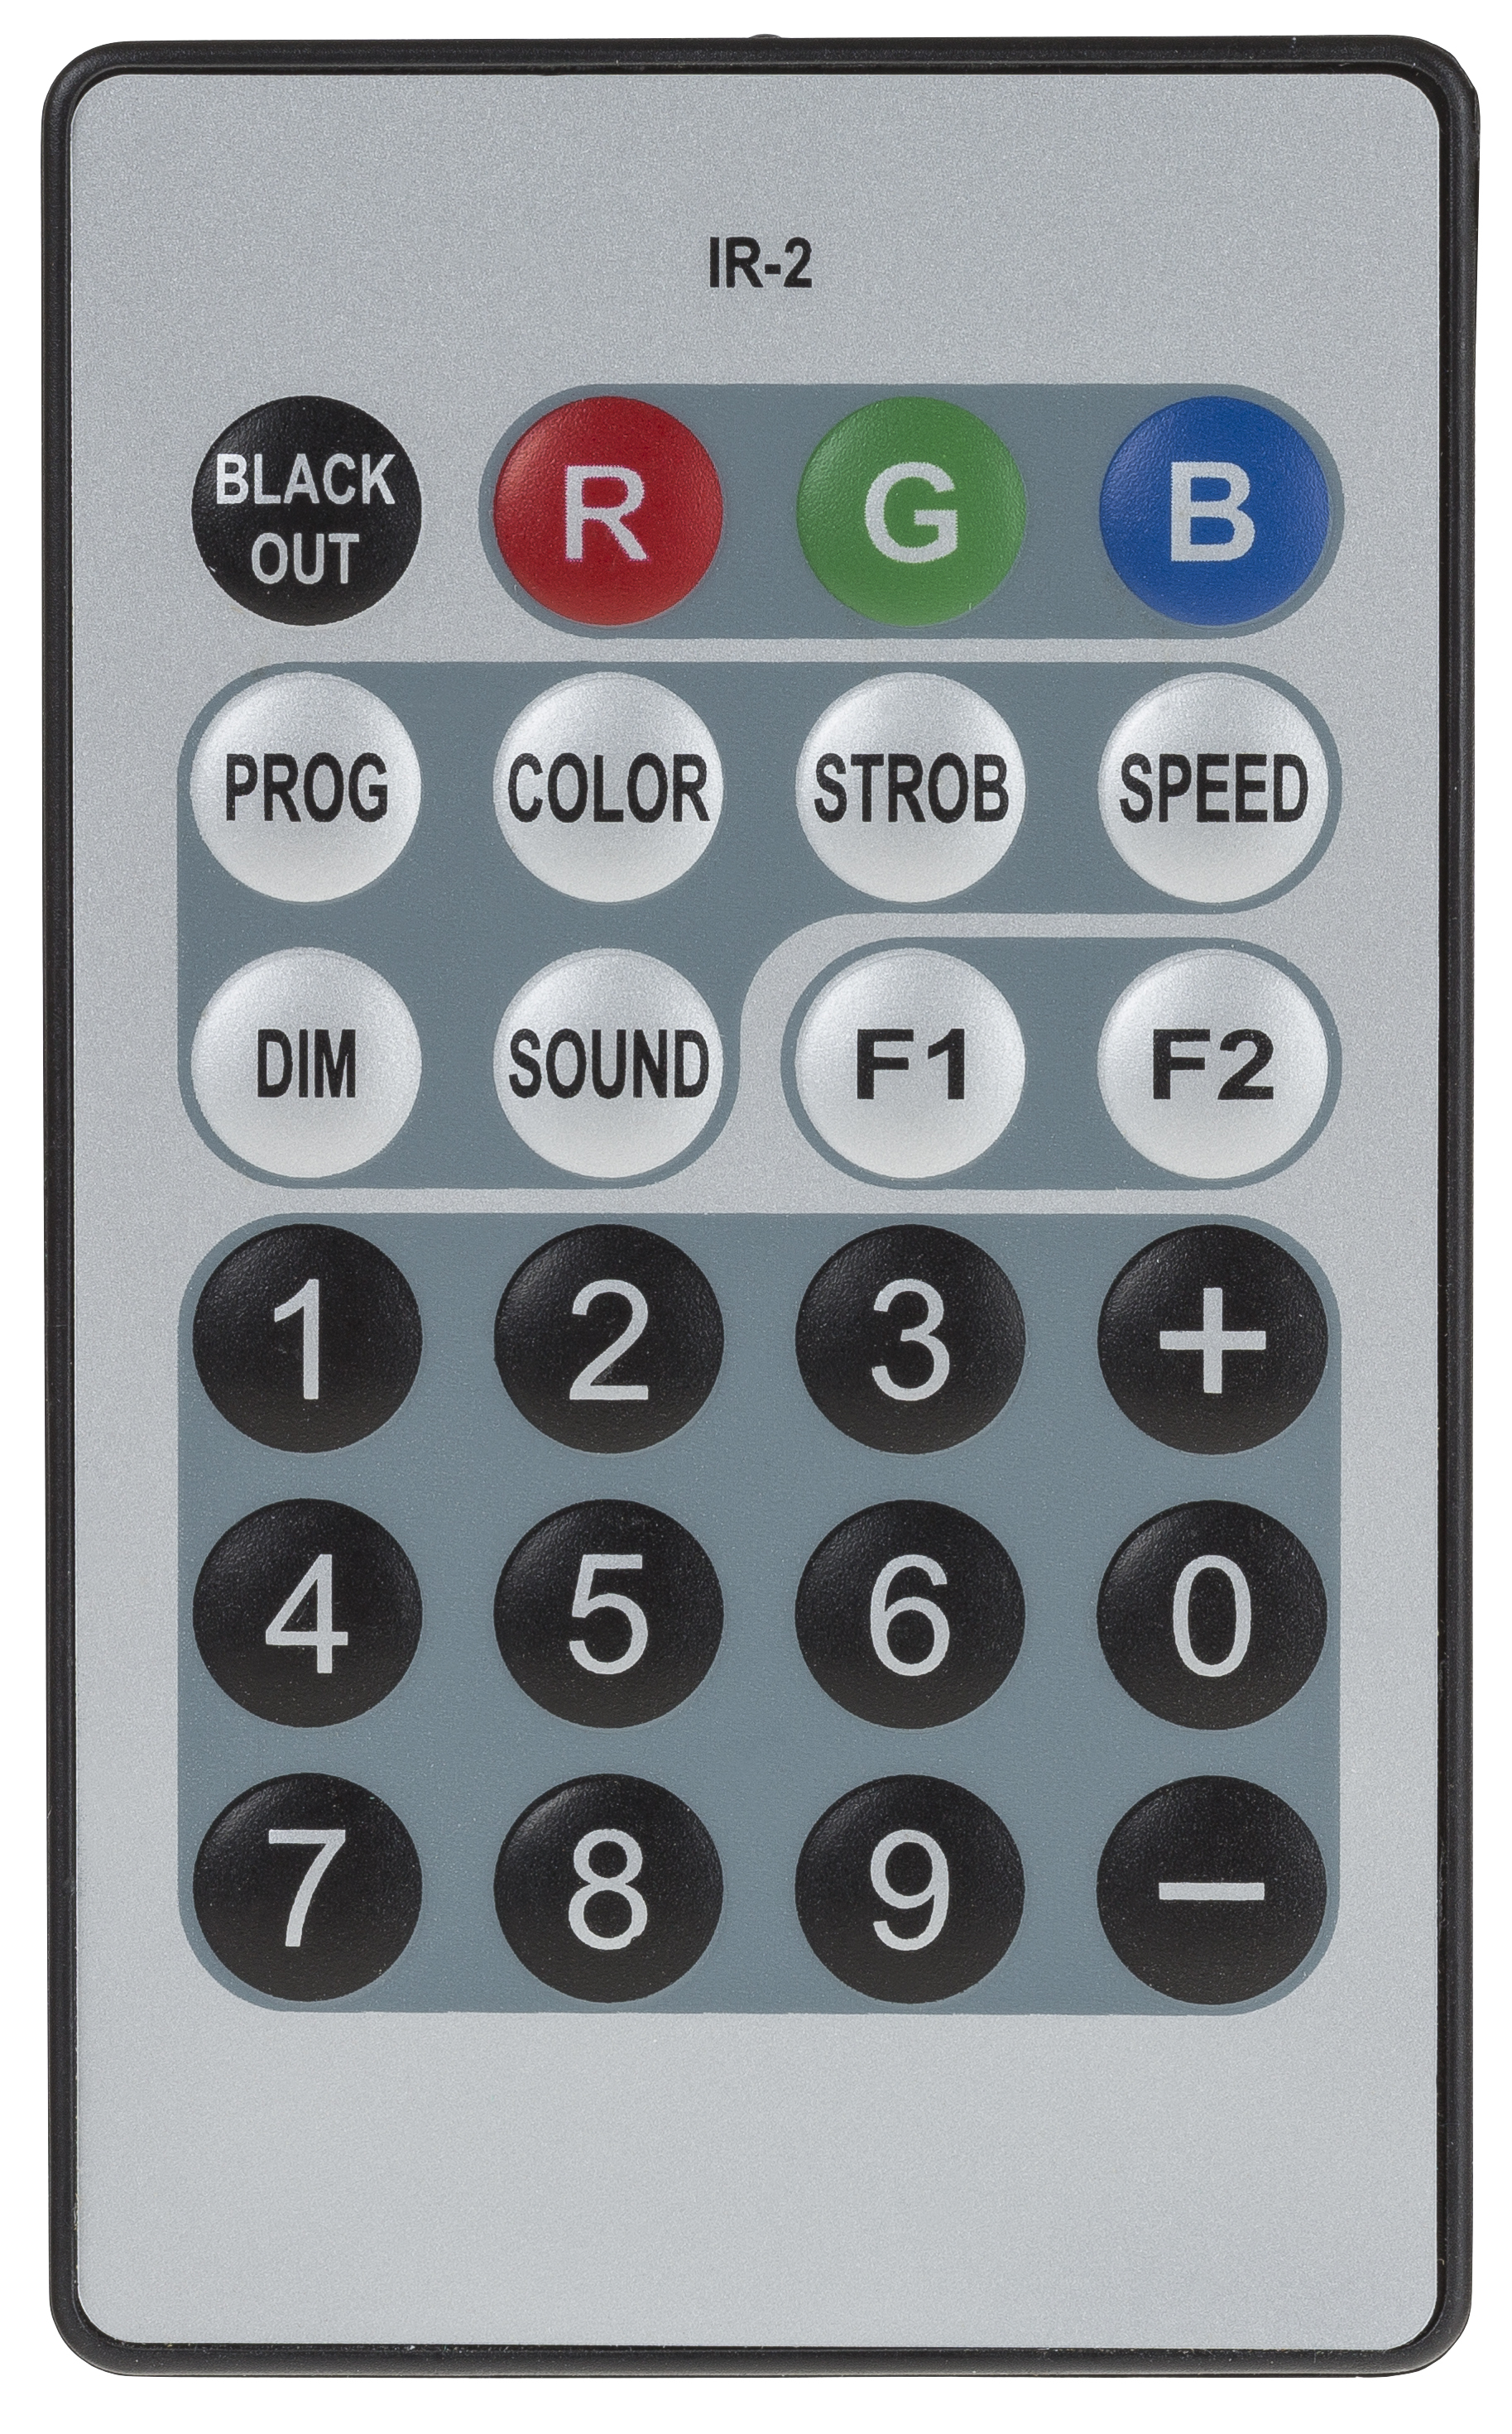 Infrared remote controller